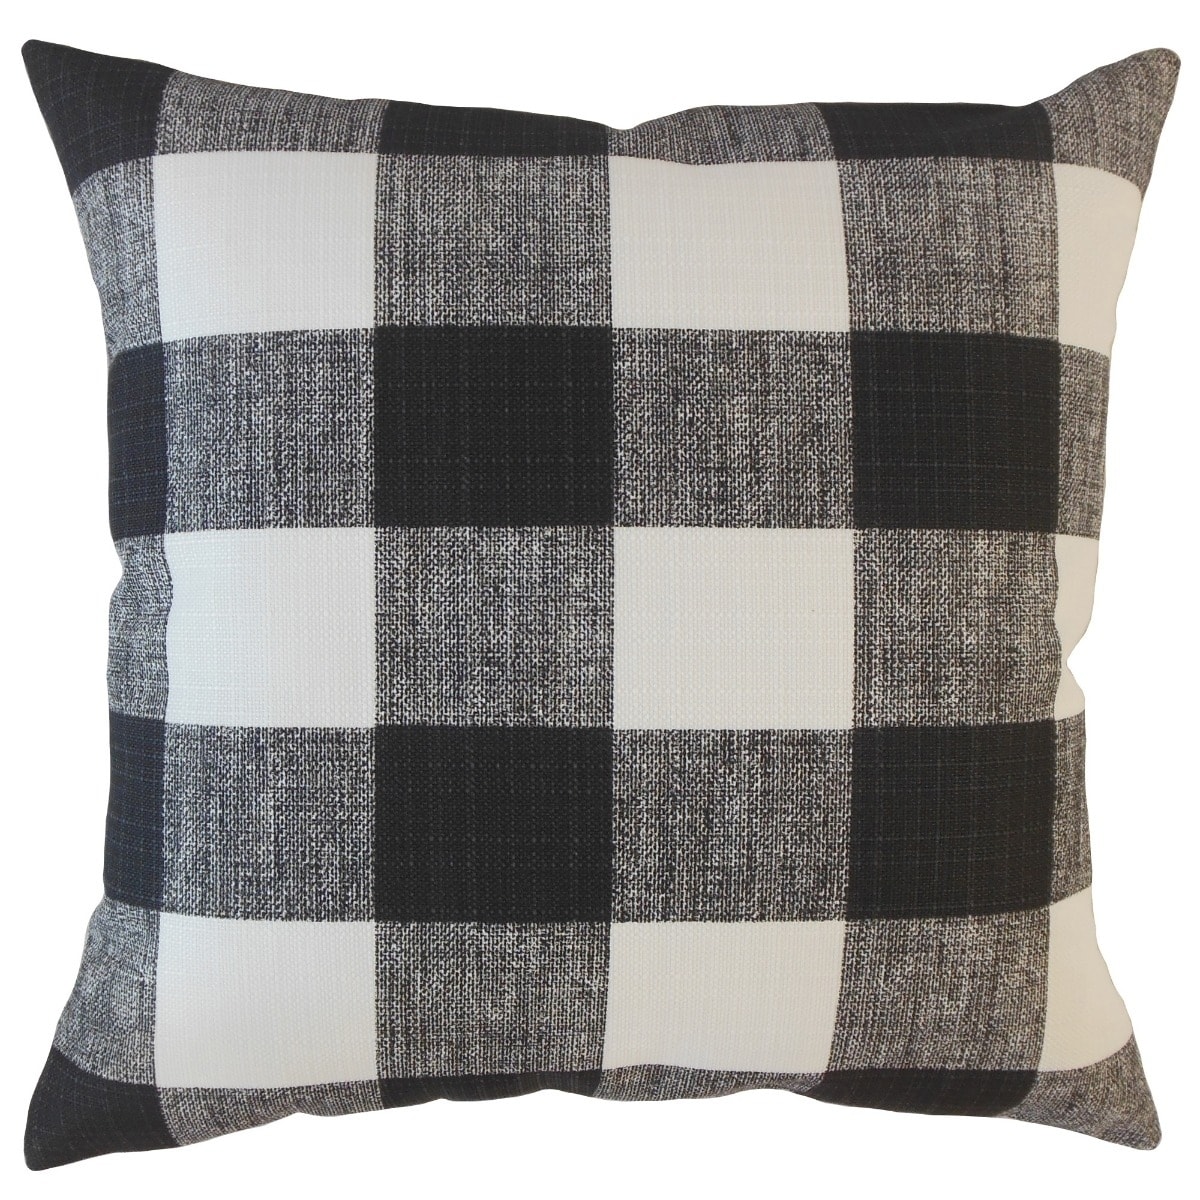 The Pillow Collection  Oormi Plaid Decorative Throw Pillow Black Euro Square - image 1 of 5